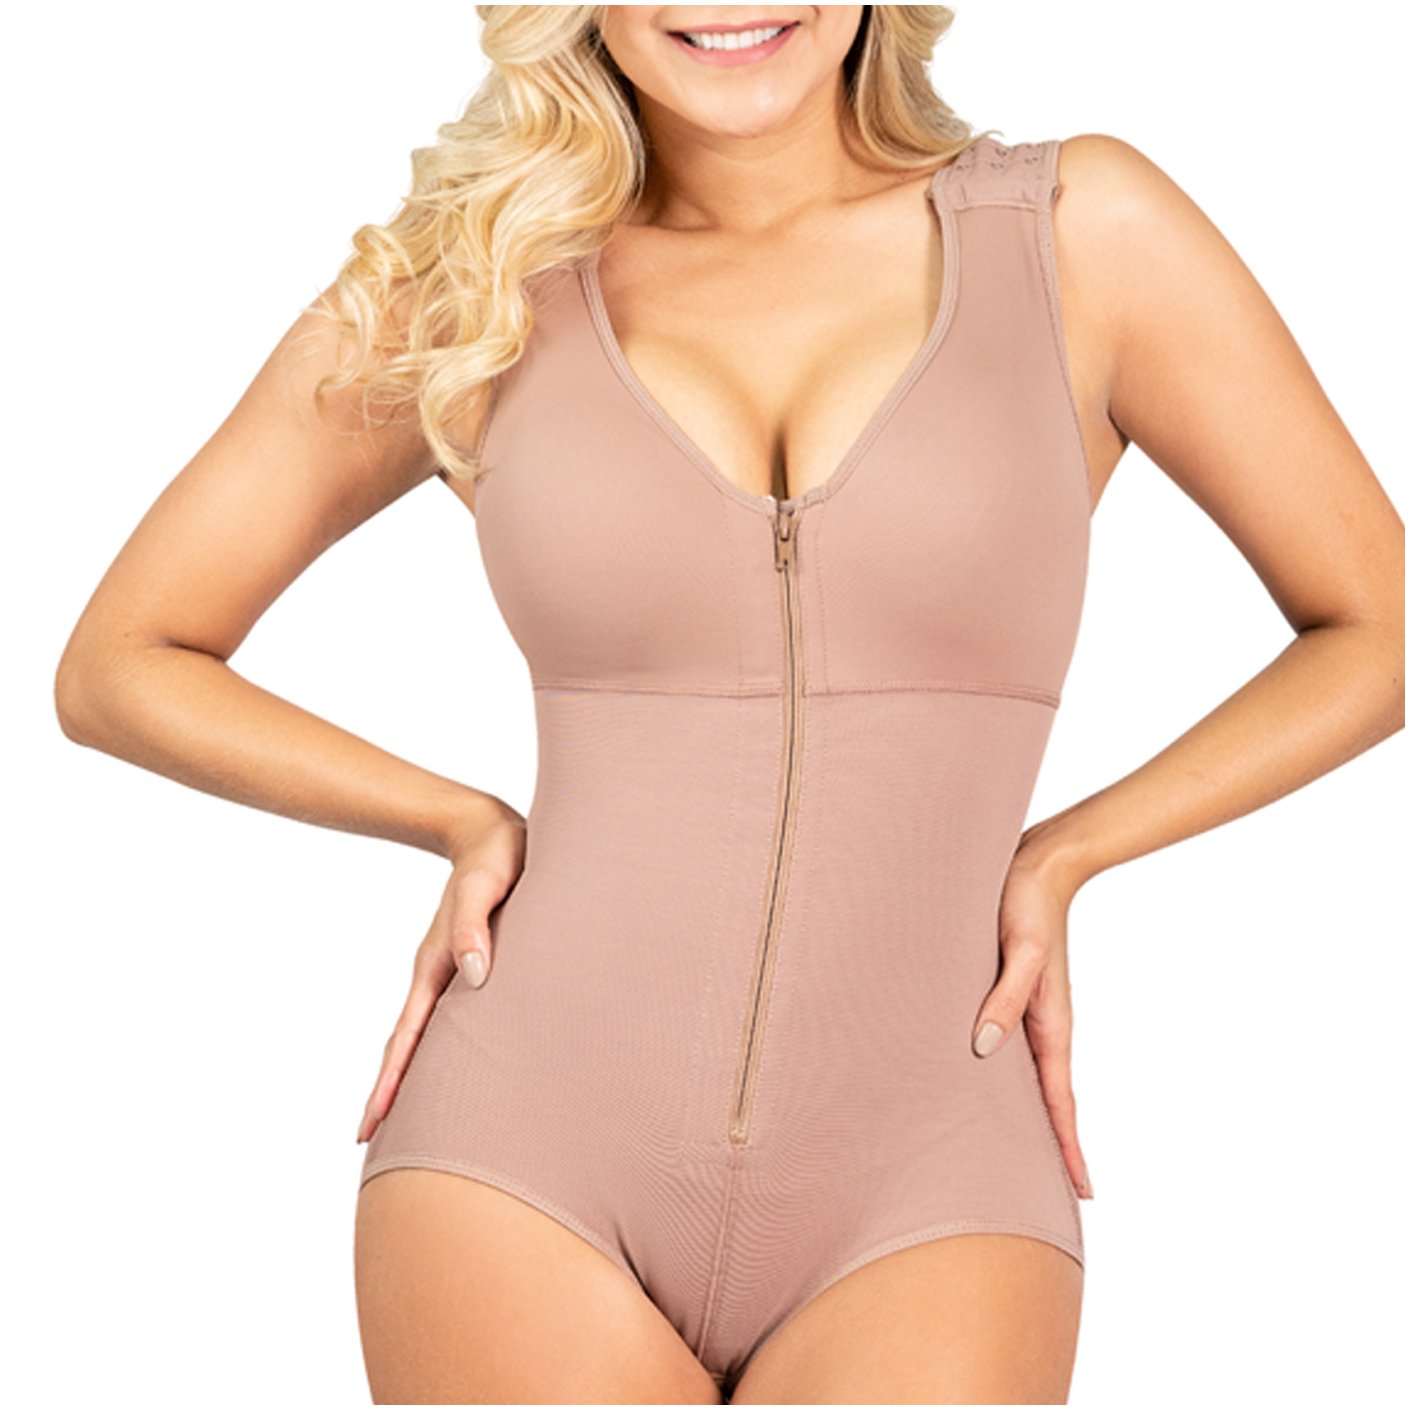 Sonryse 055 | Panty Bodysuit Shapewear with Built-in Bra | Postpartum and Daily Use - fajacolombian